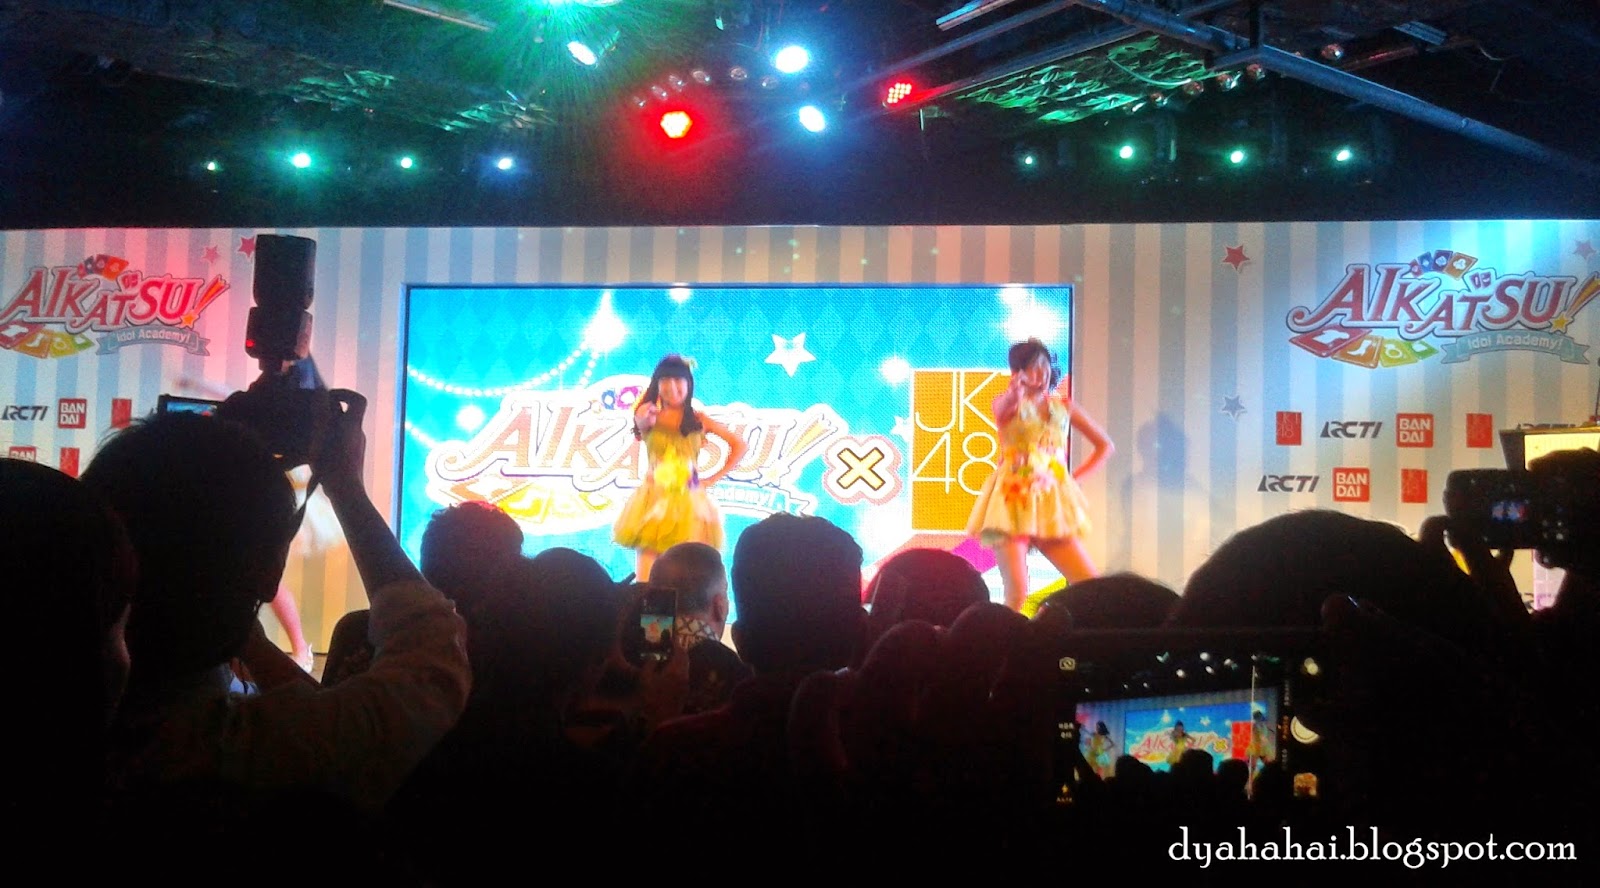 Aikatsu! Press Conference - One of Music started and it will released for RCTI Channel. Developed by the BANDAI.
Source: dyahahai.blogspot.com